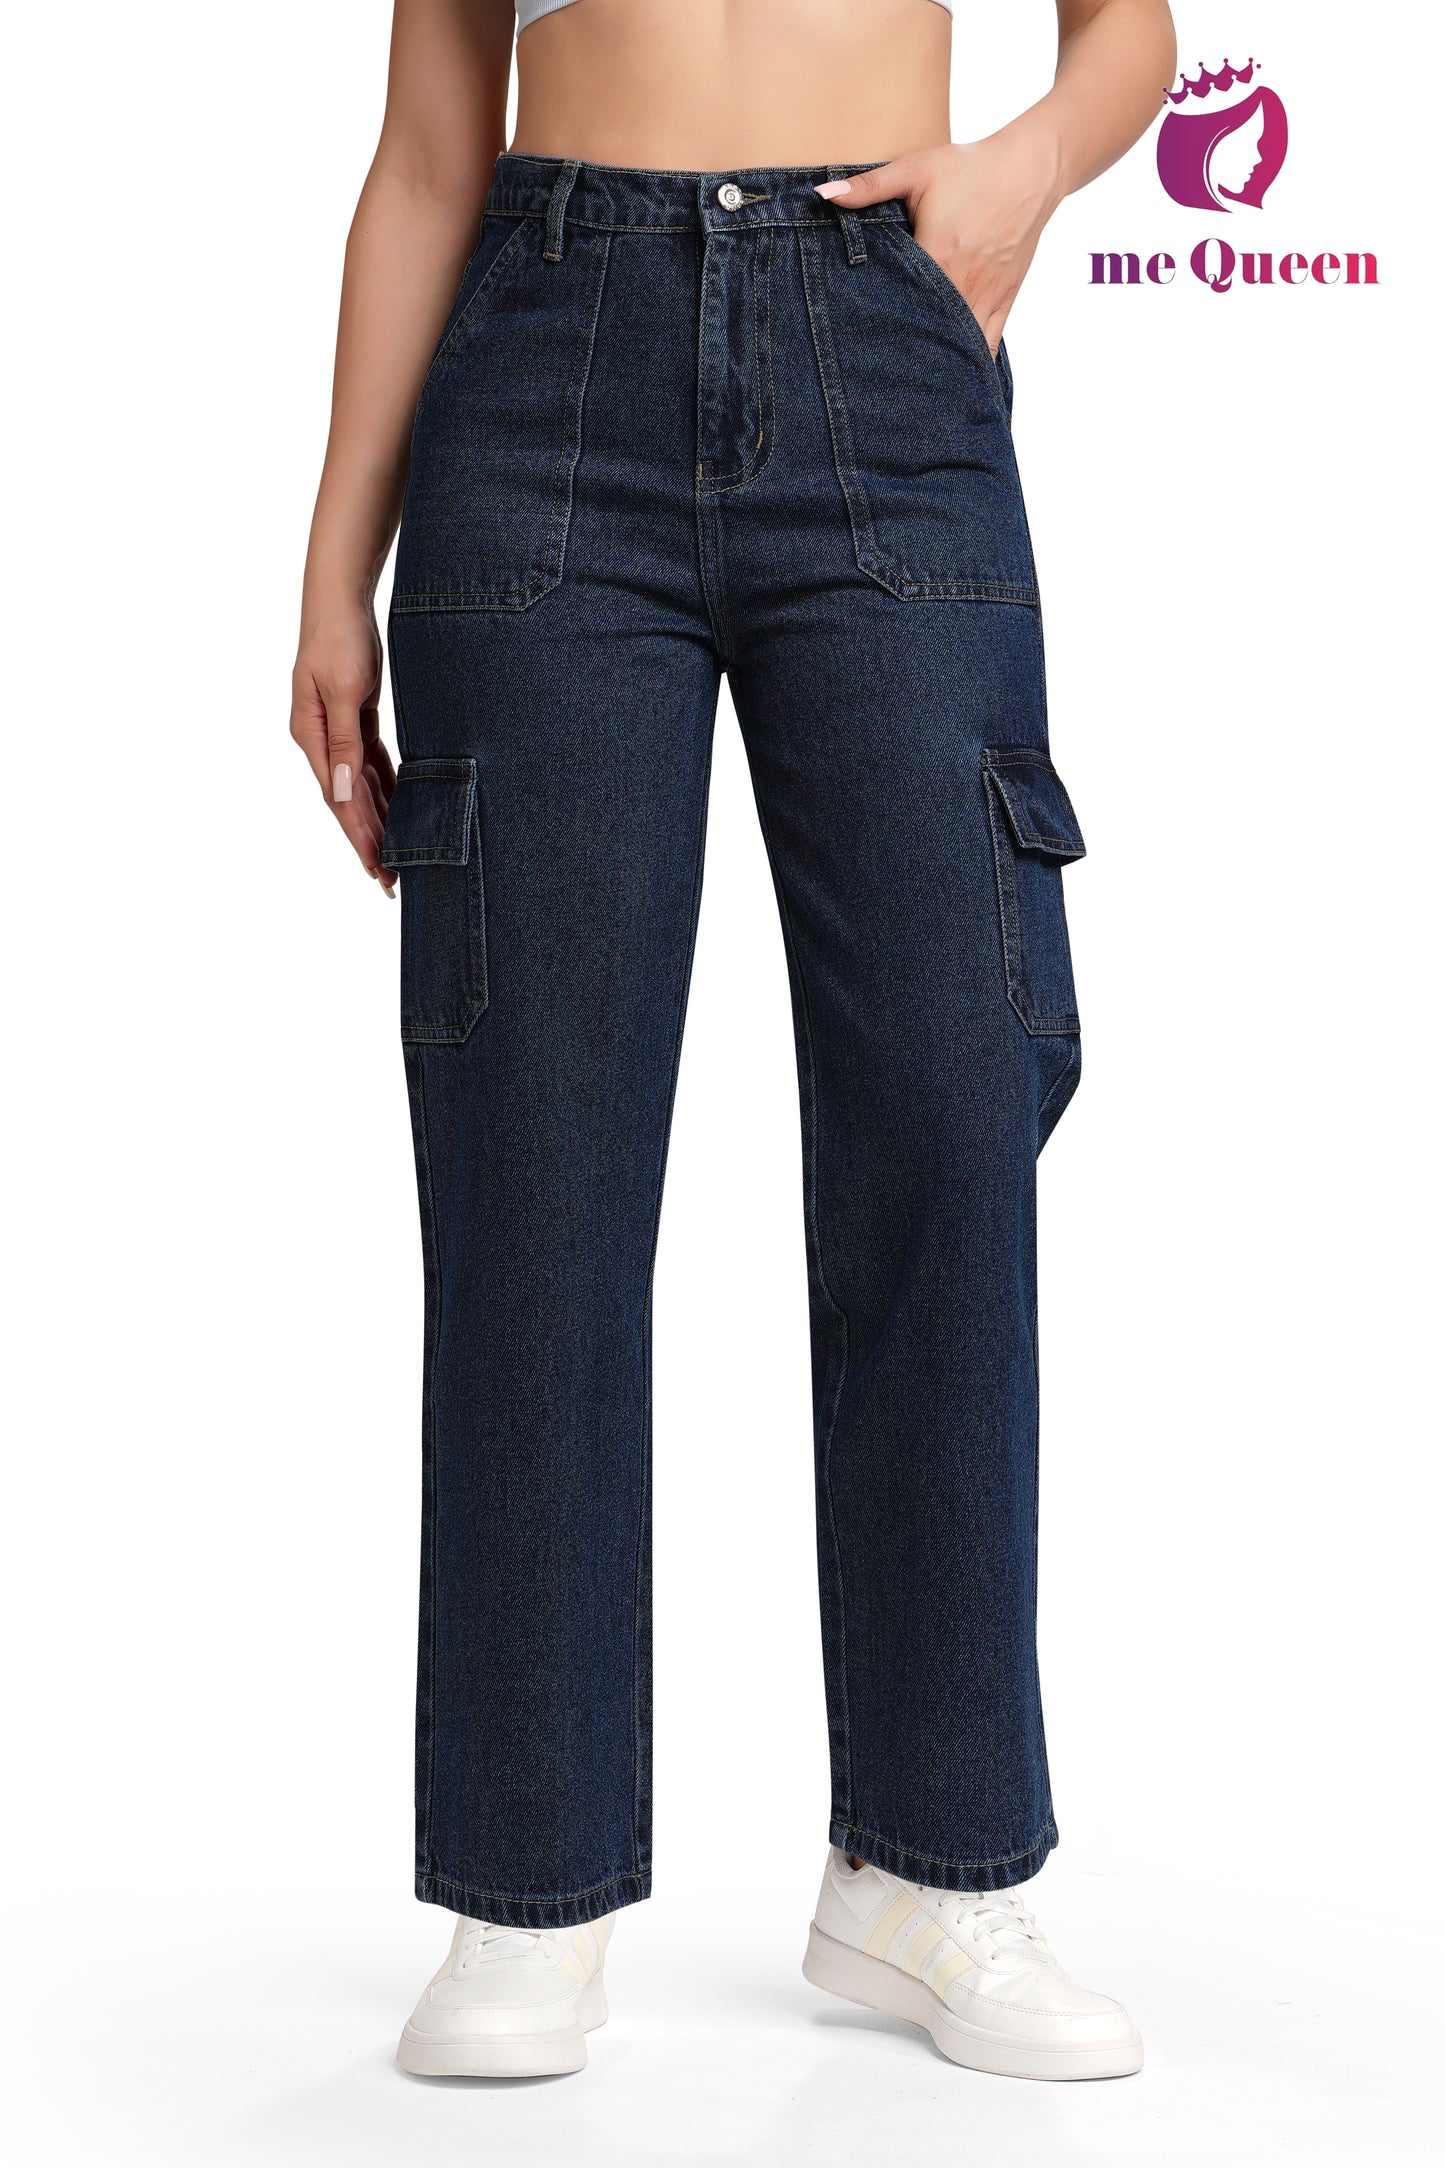 MeQueen Women Gunmetal Blue Loose Fit Cargo Jeans with Flap Pockets